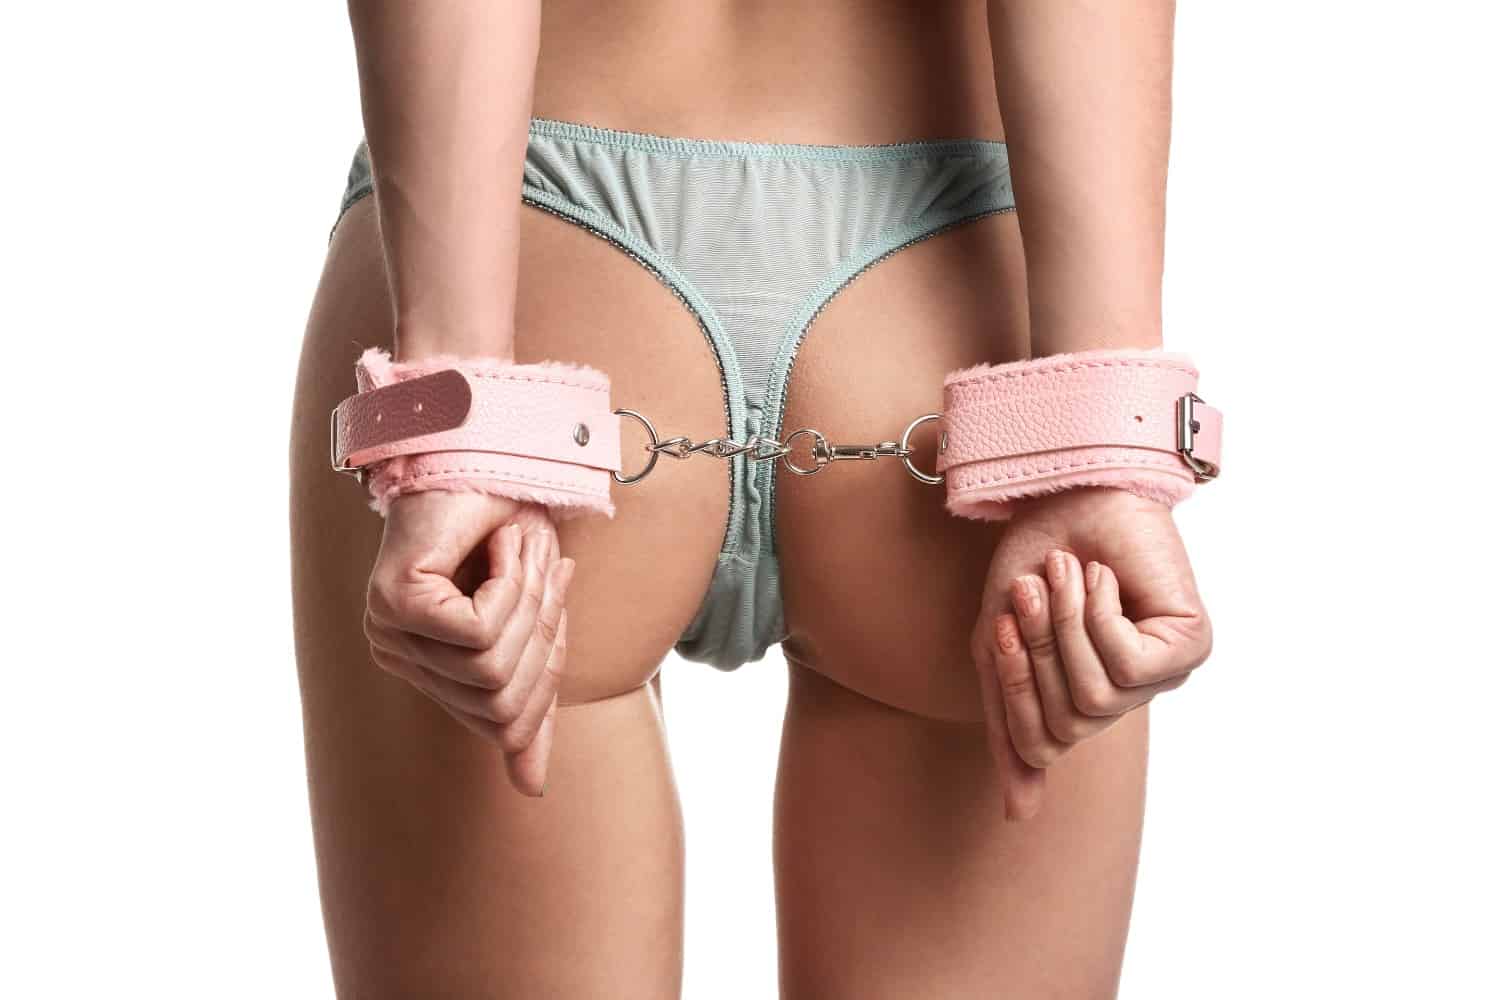 Image of a girls butt with her hand cuffed behind her back.